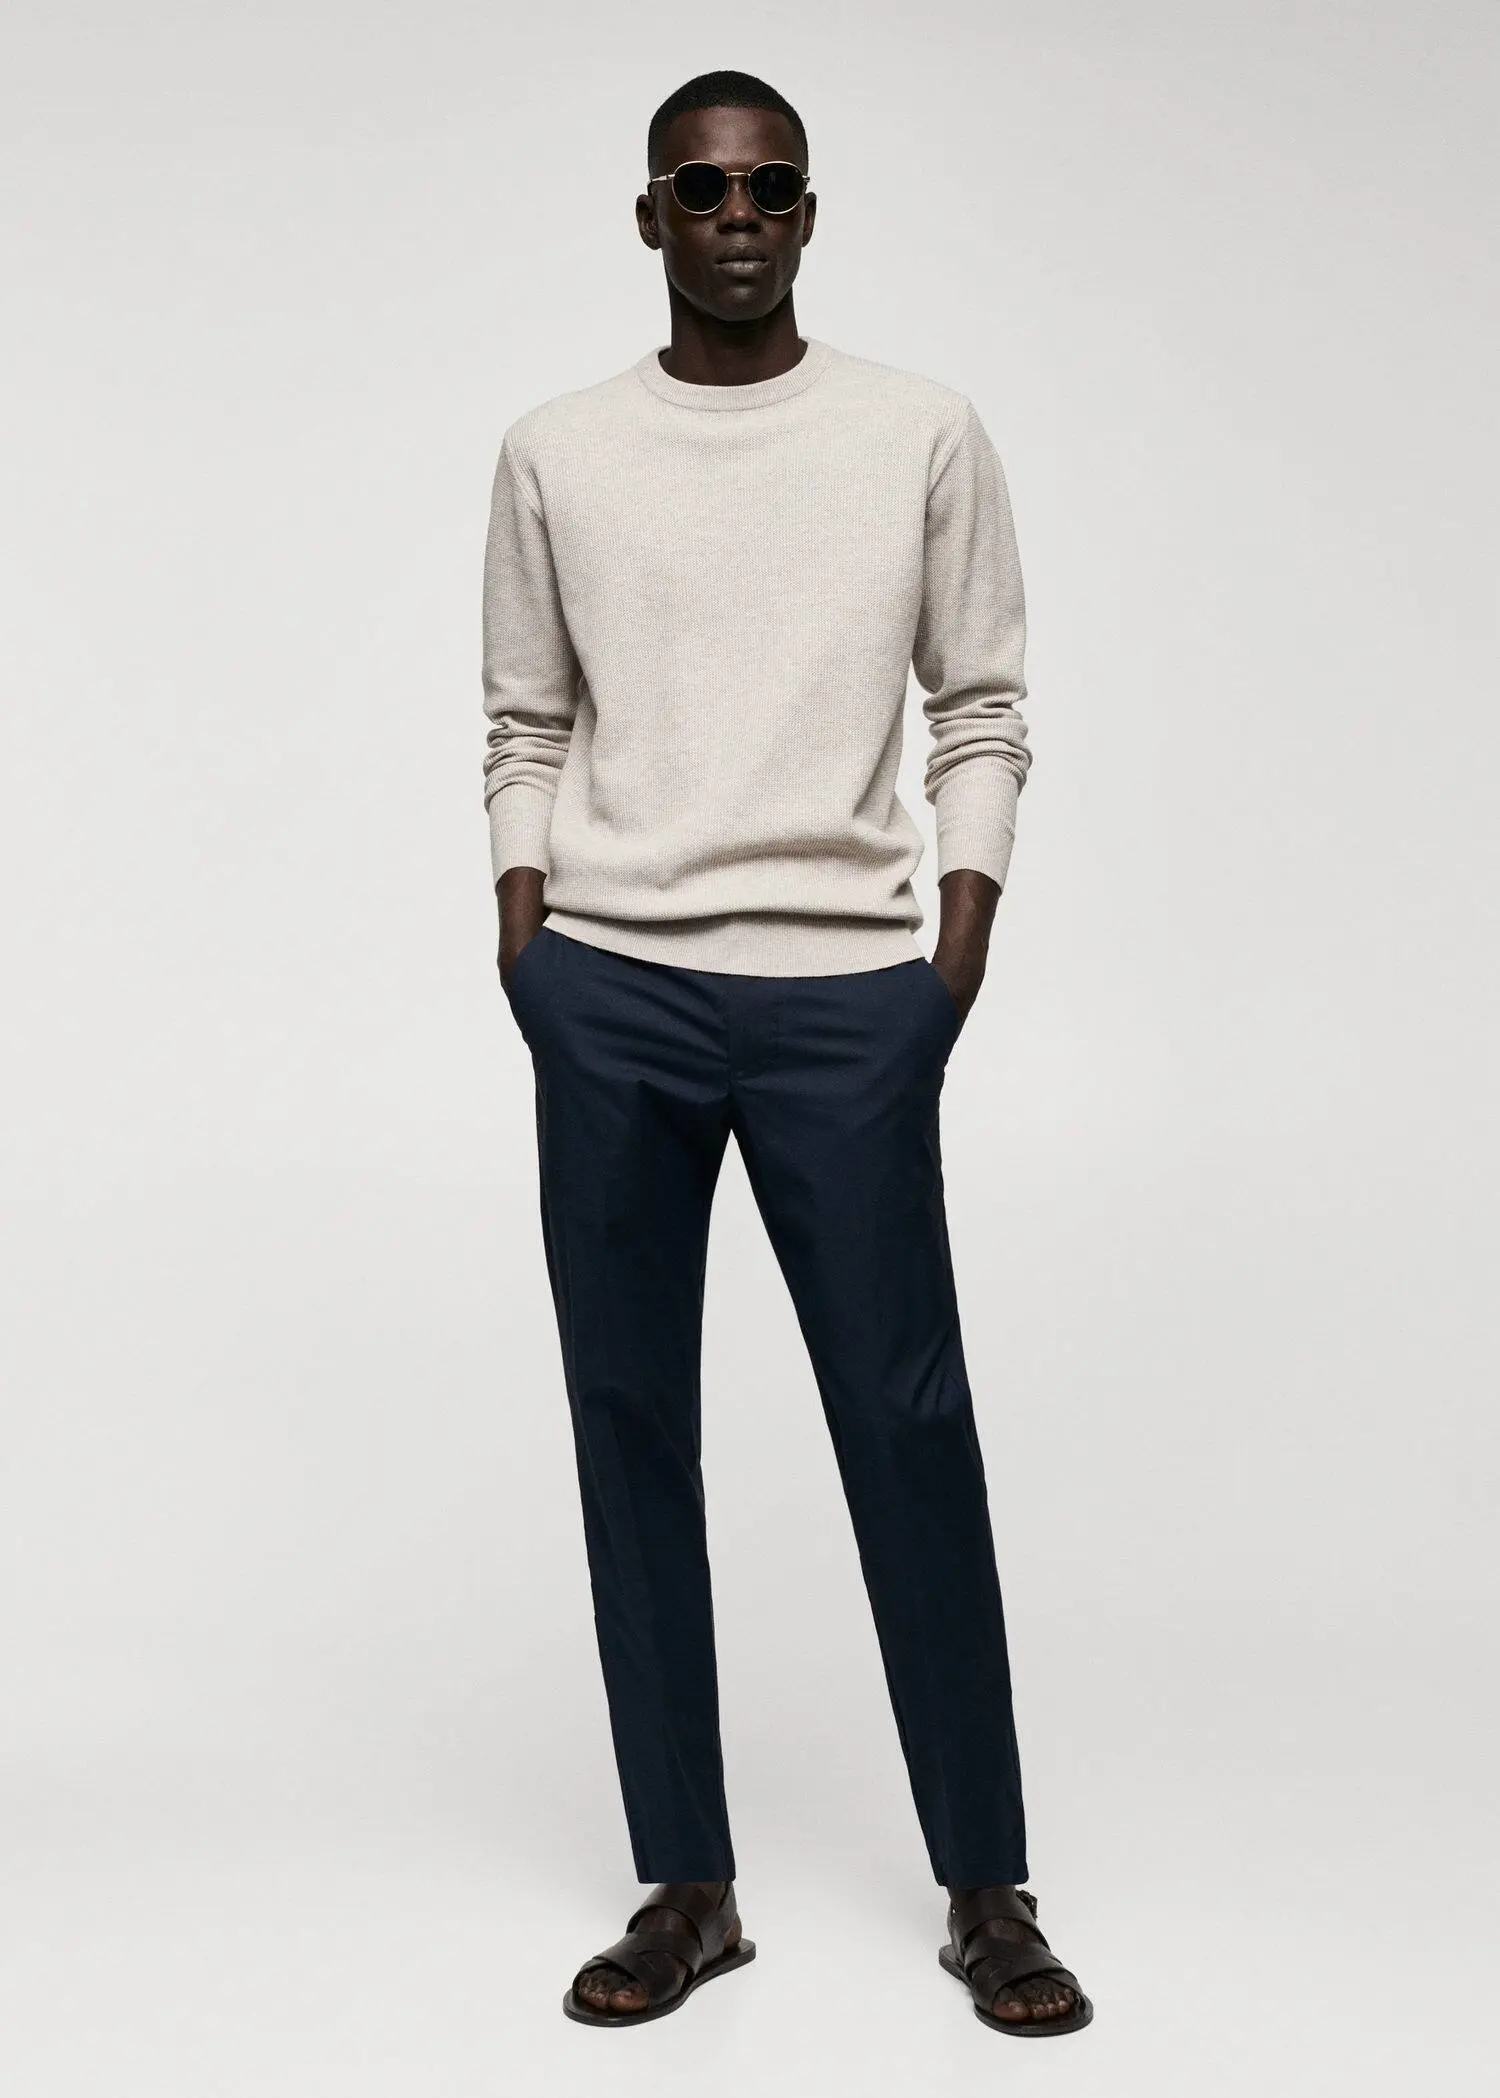 Mango Structured cotton sweater. a man in a white shirt and black pants. 